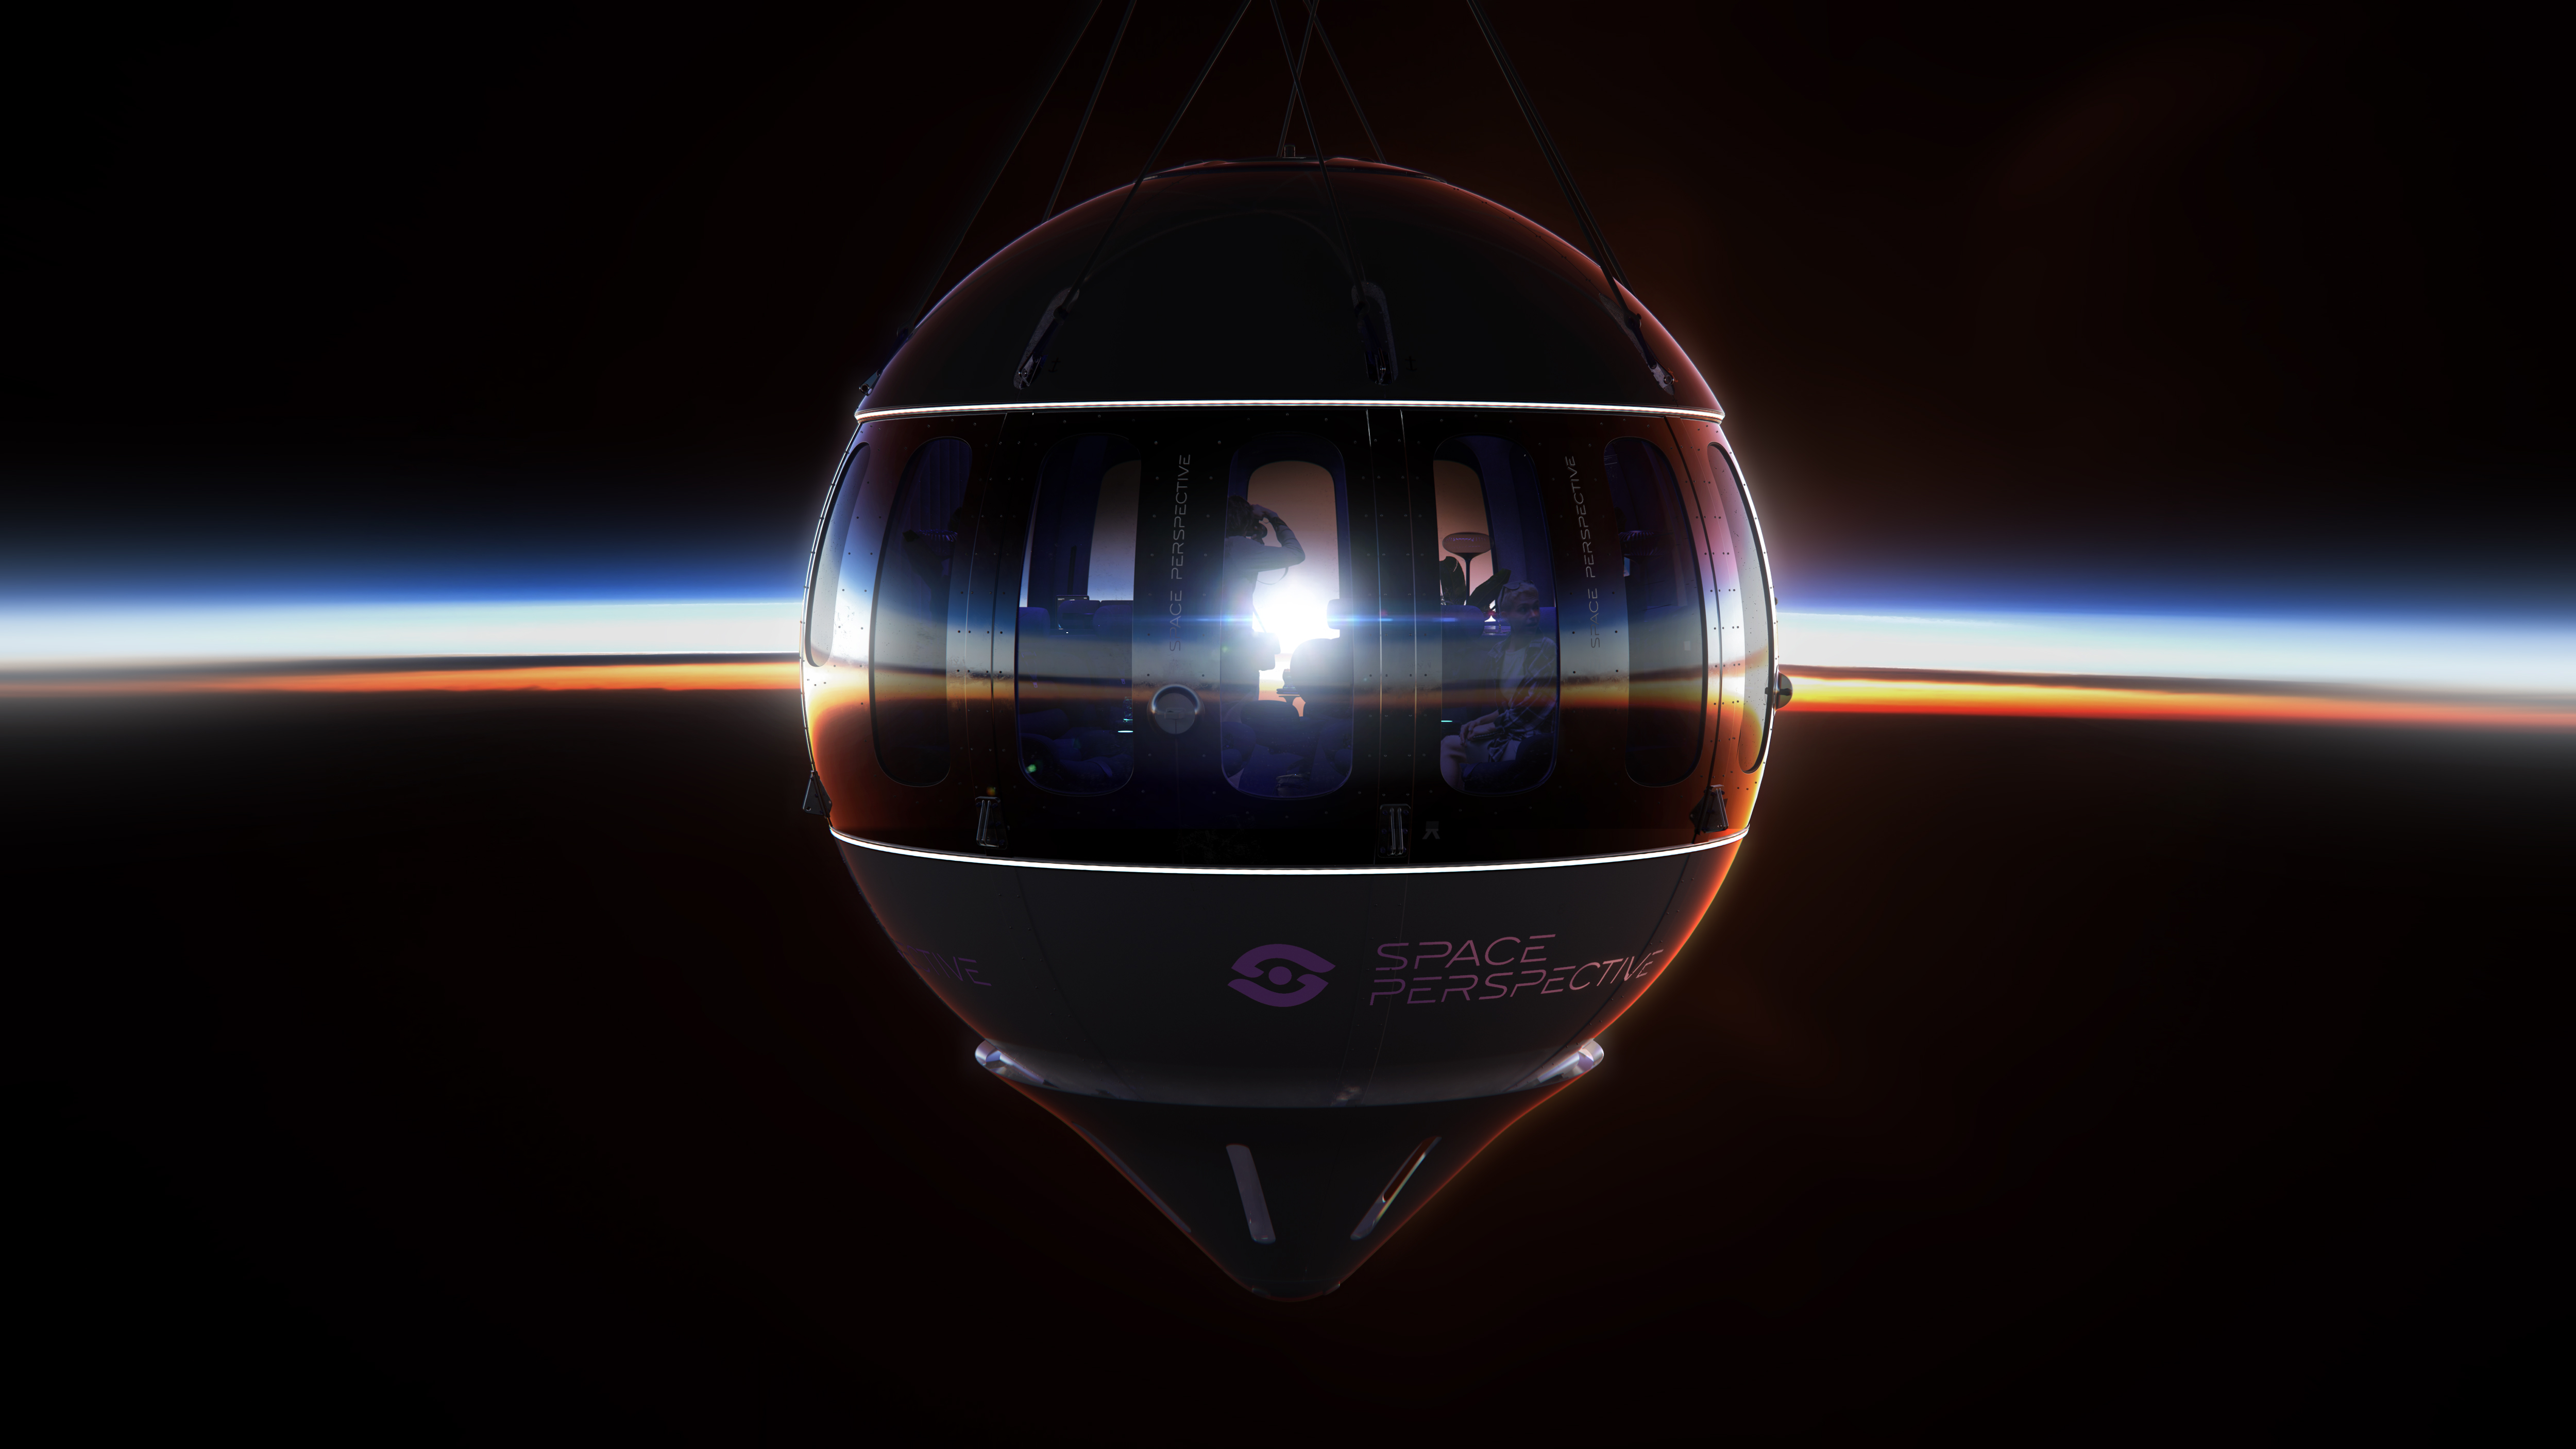 Space Perspective Unveils Patented Capsule Design - Now in